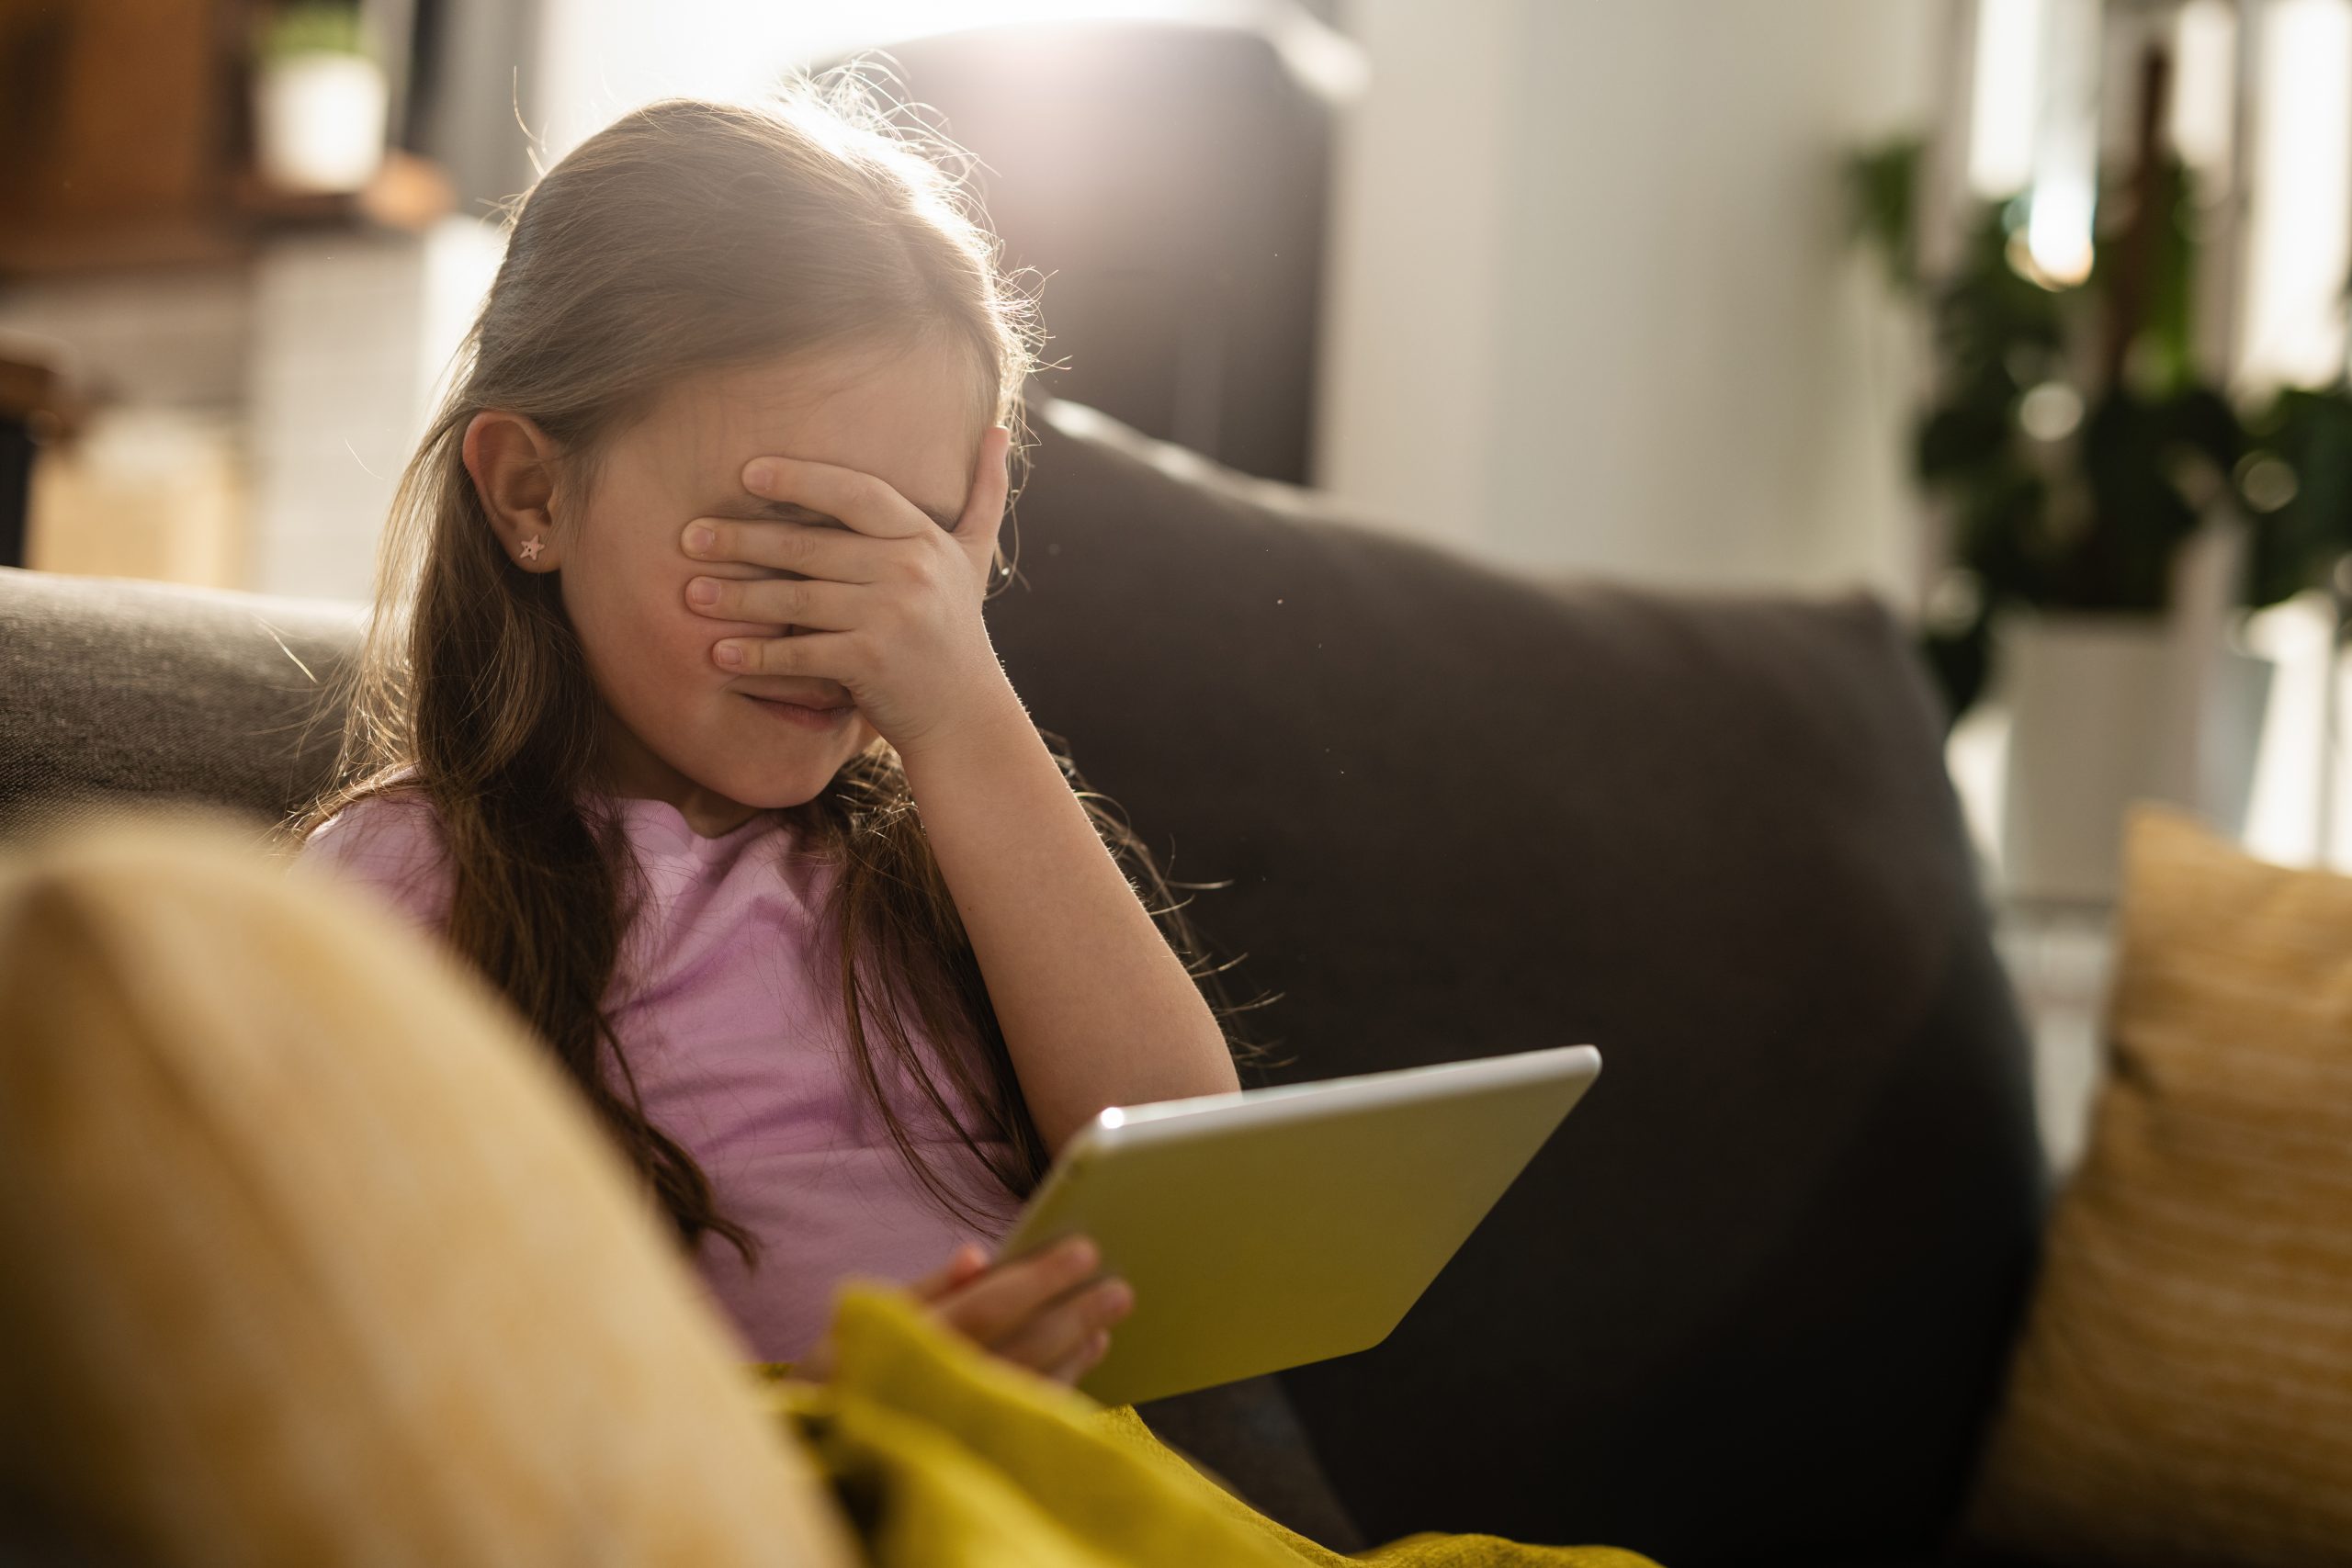 5 negative effects of pornography on children